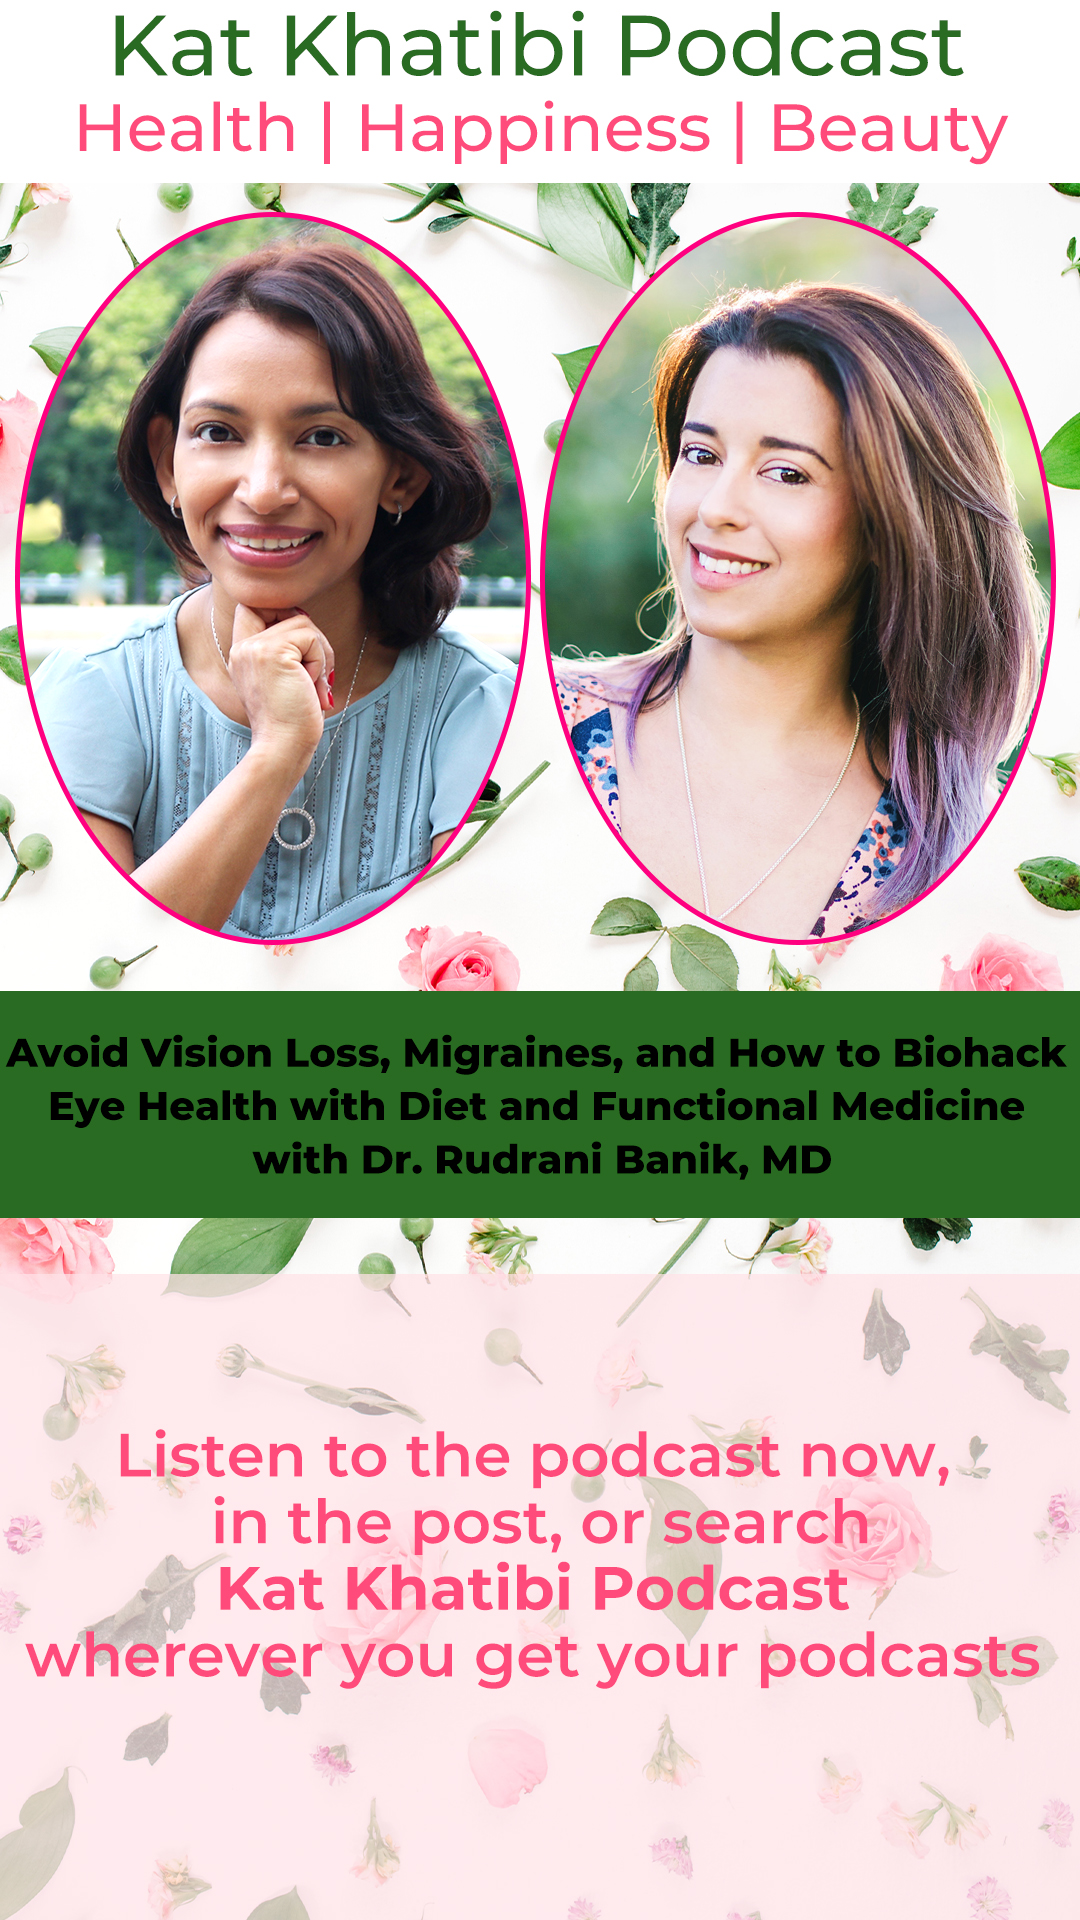 Avoid Vision Loss, Migraines, and How to Biohack Eye Health with Diet and Functional Medicine with Dr. Rudrani Banik, MD